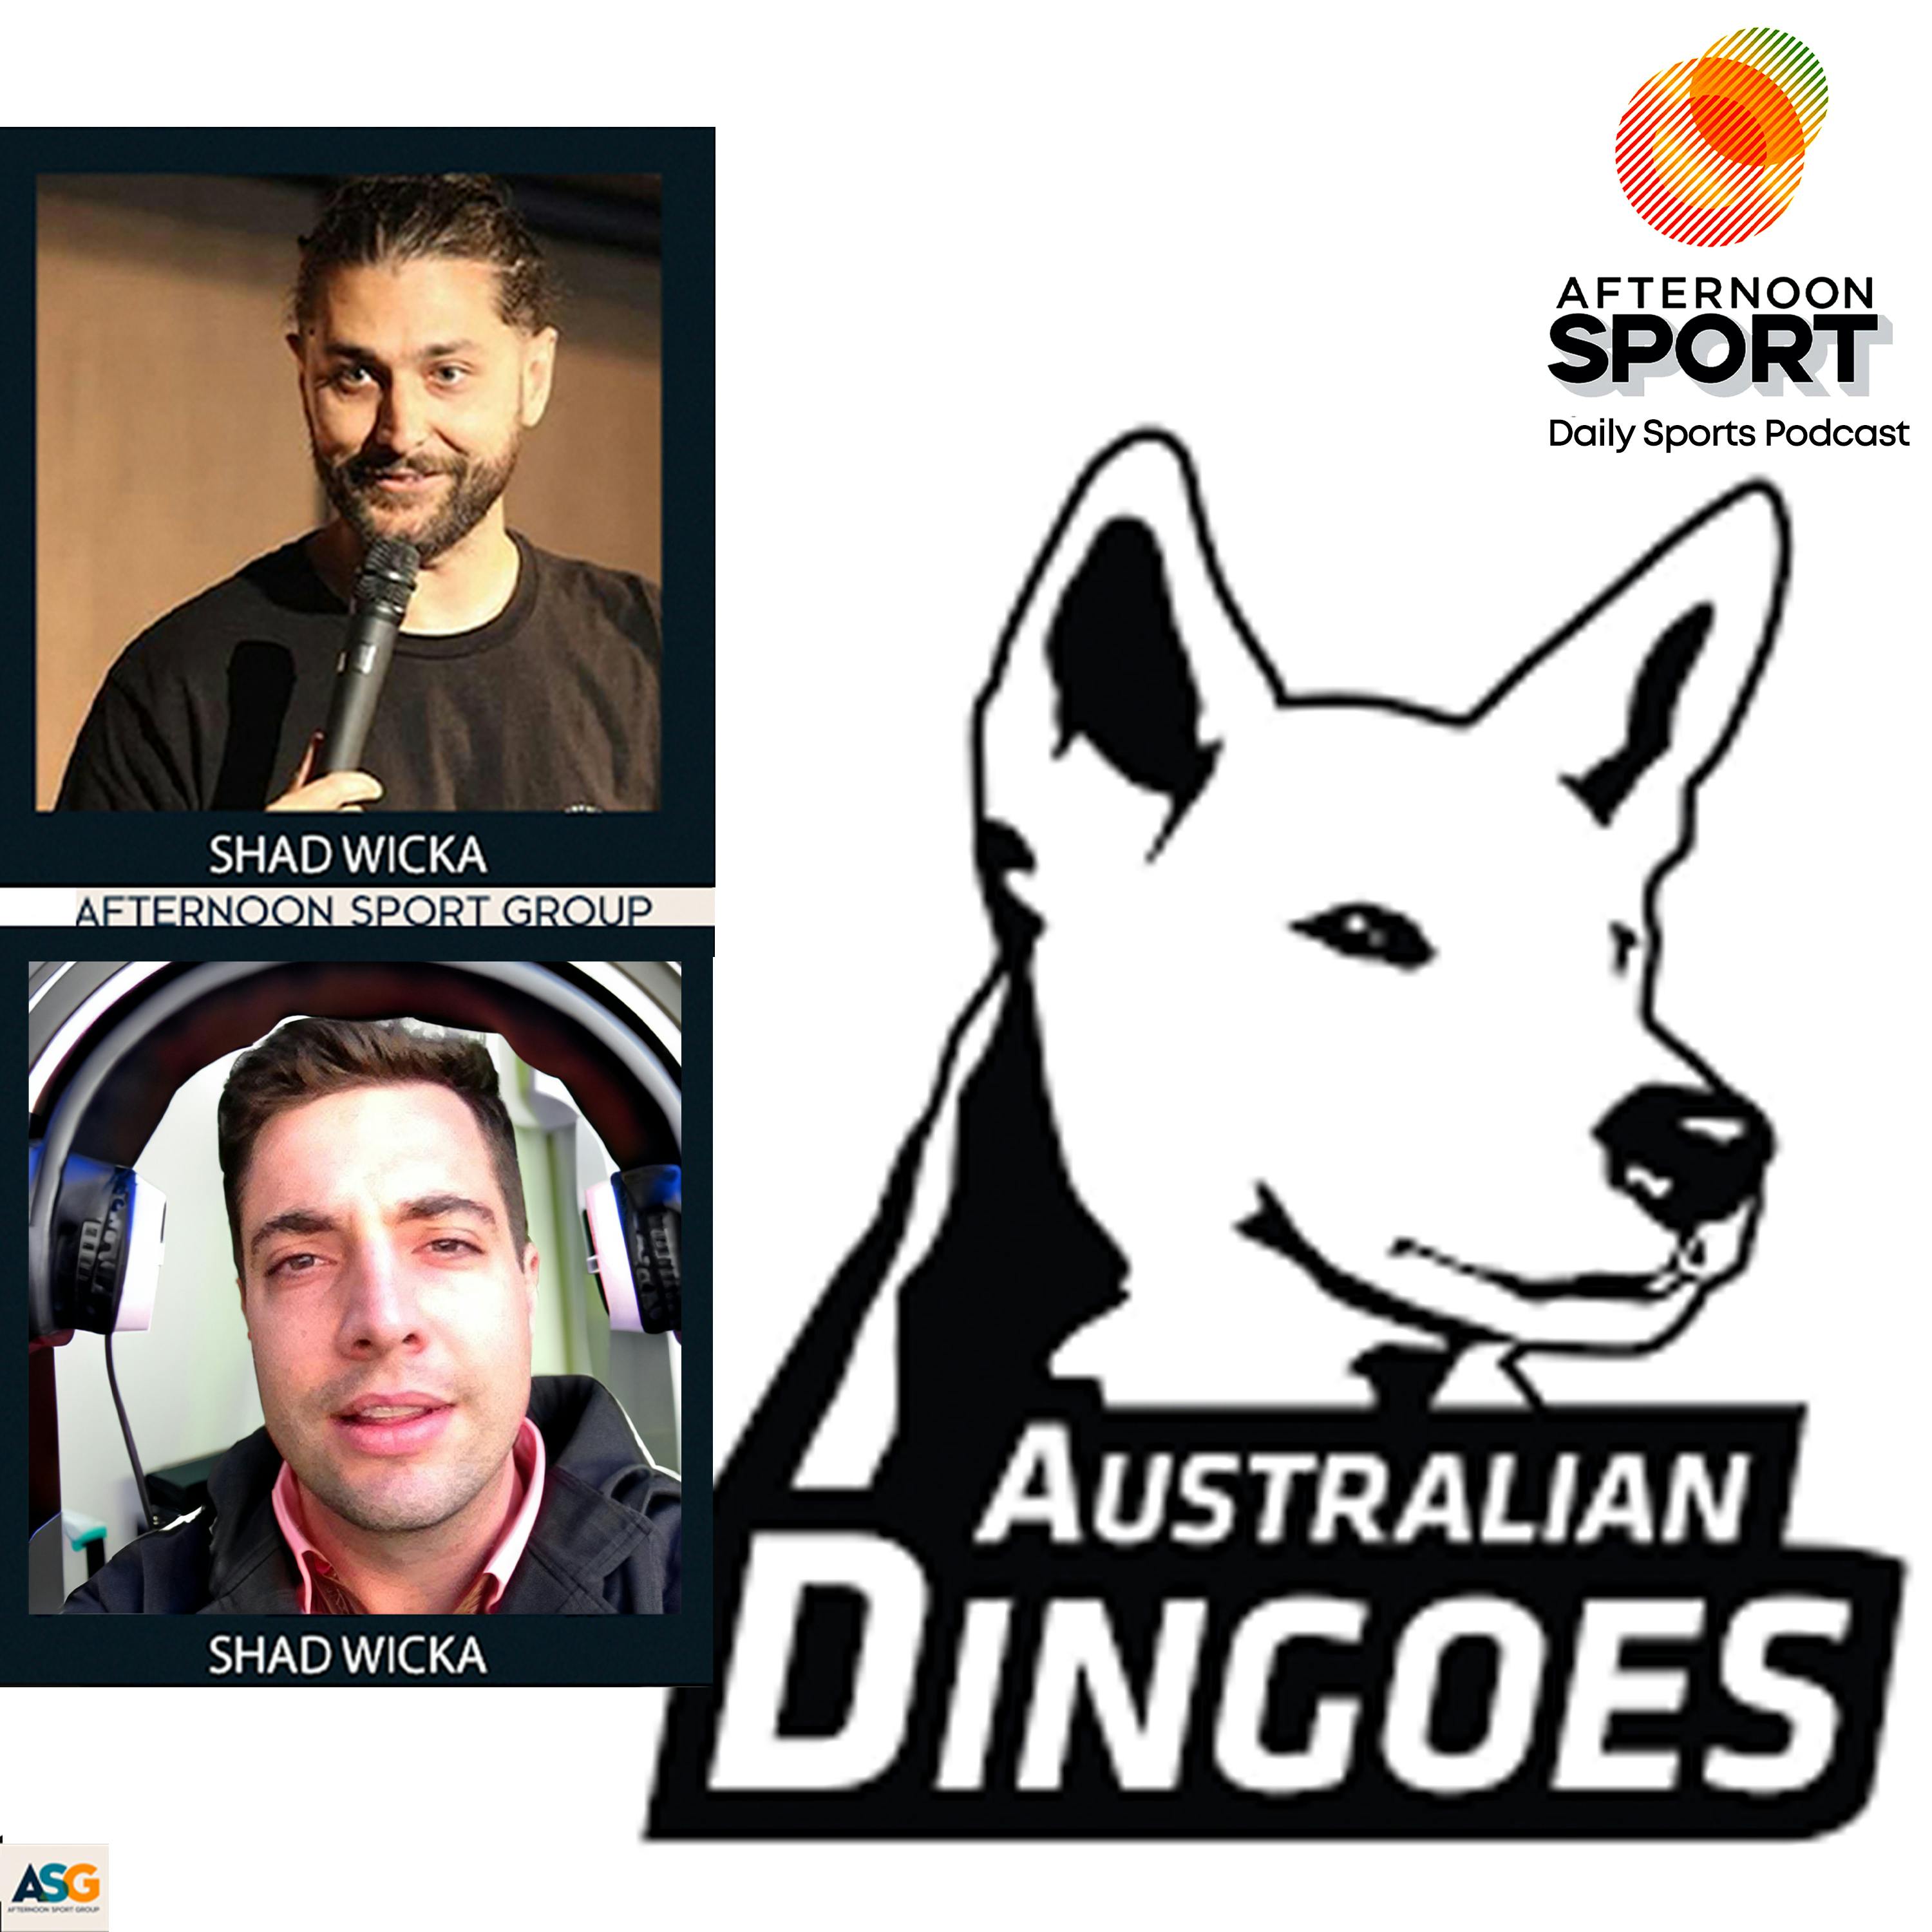 3rd August Shad Wicka & Dan McHugh: Naming Australian Teams, Go the Dingoes, Women’s World Cup, AFL, NRL + more!